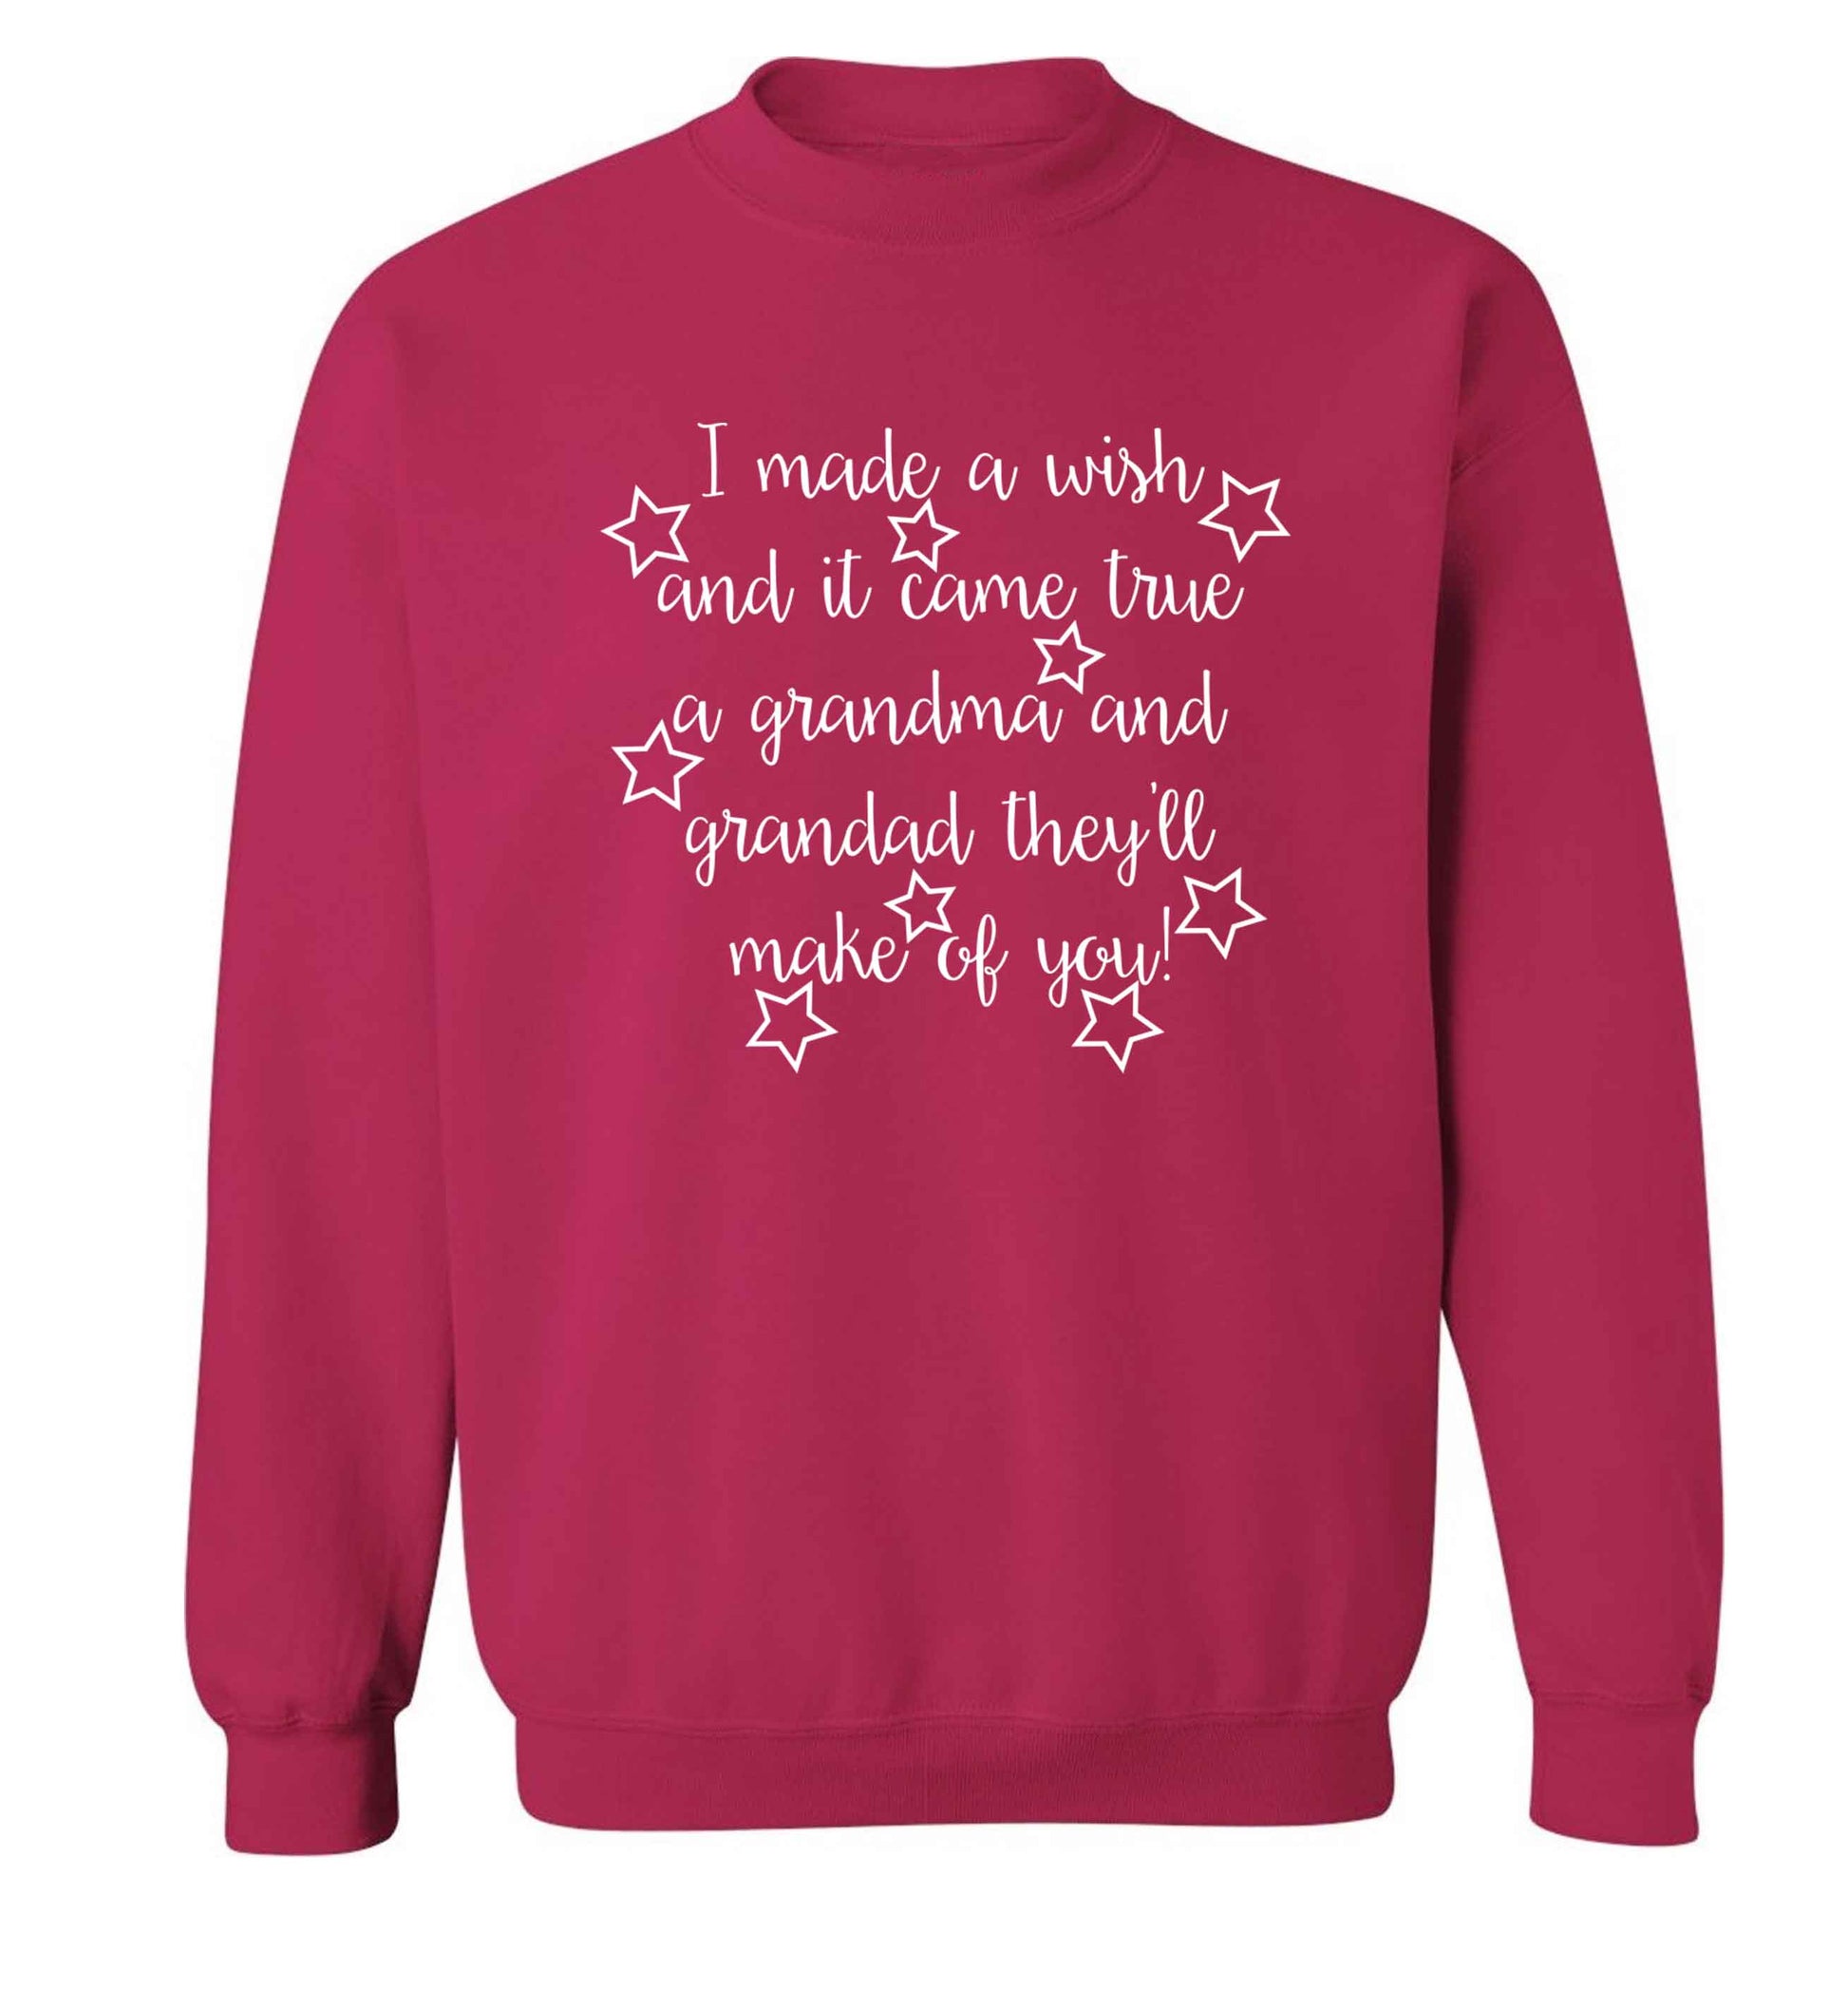 I made a wish and it came true a grandma and grandad they'll make of you! Adult's unisex pink Sweater 2XL